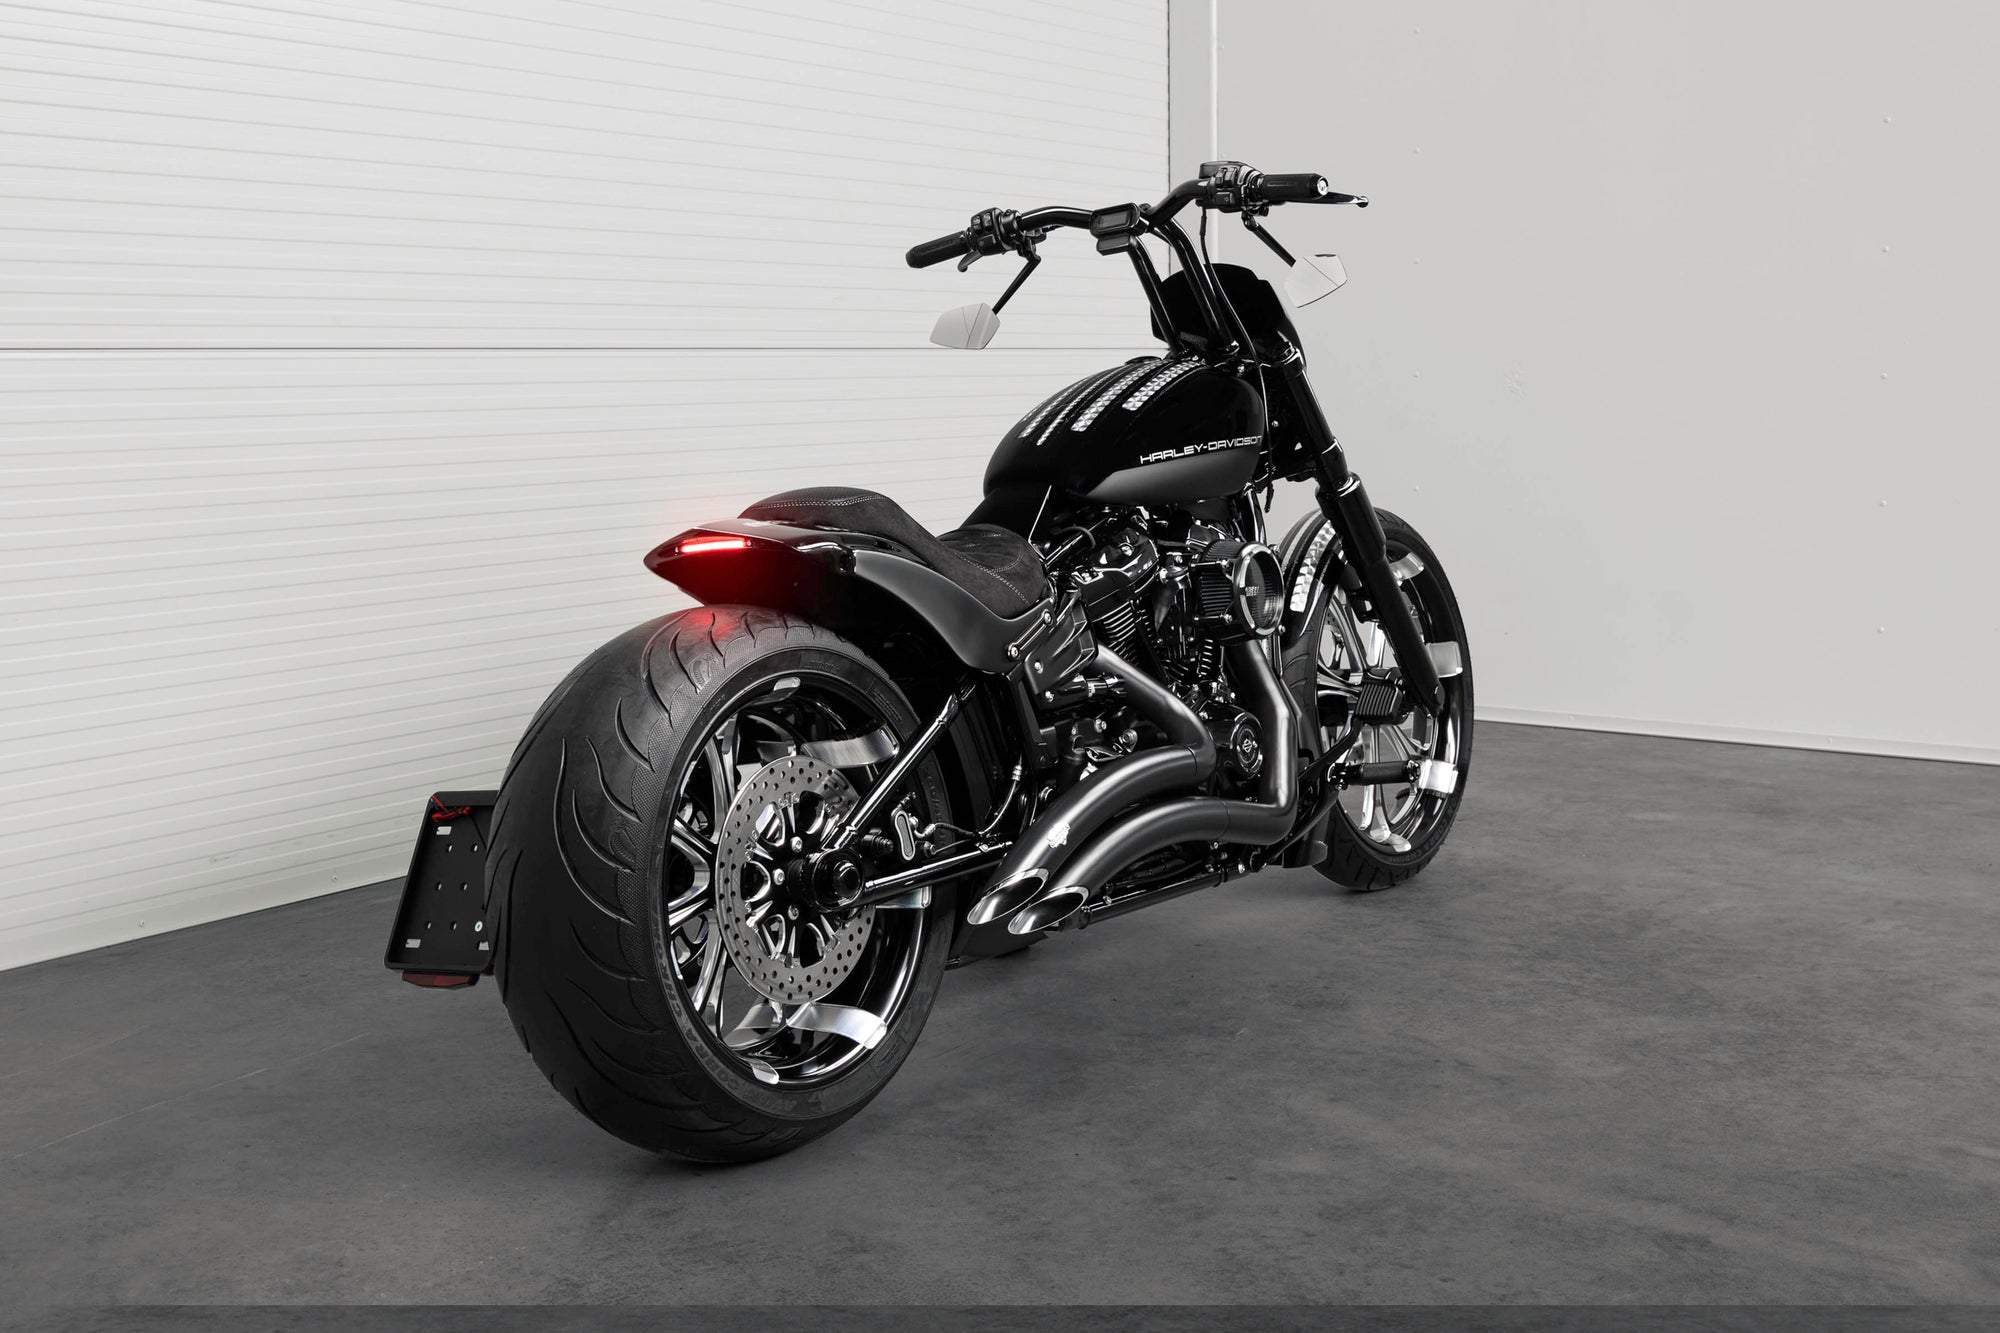 Modified Harley Davidson Breakout motorcycle with Killer Custom parts from the rear in a white modern bike shop